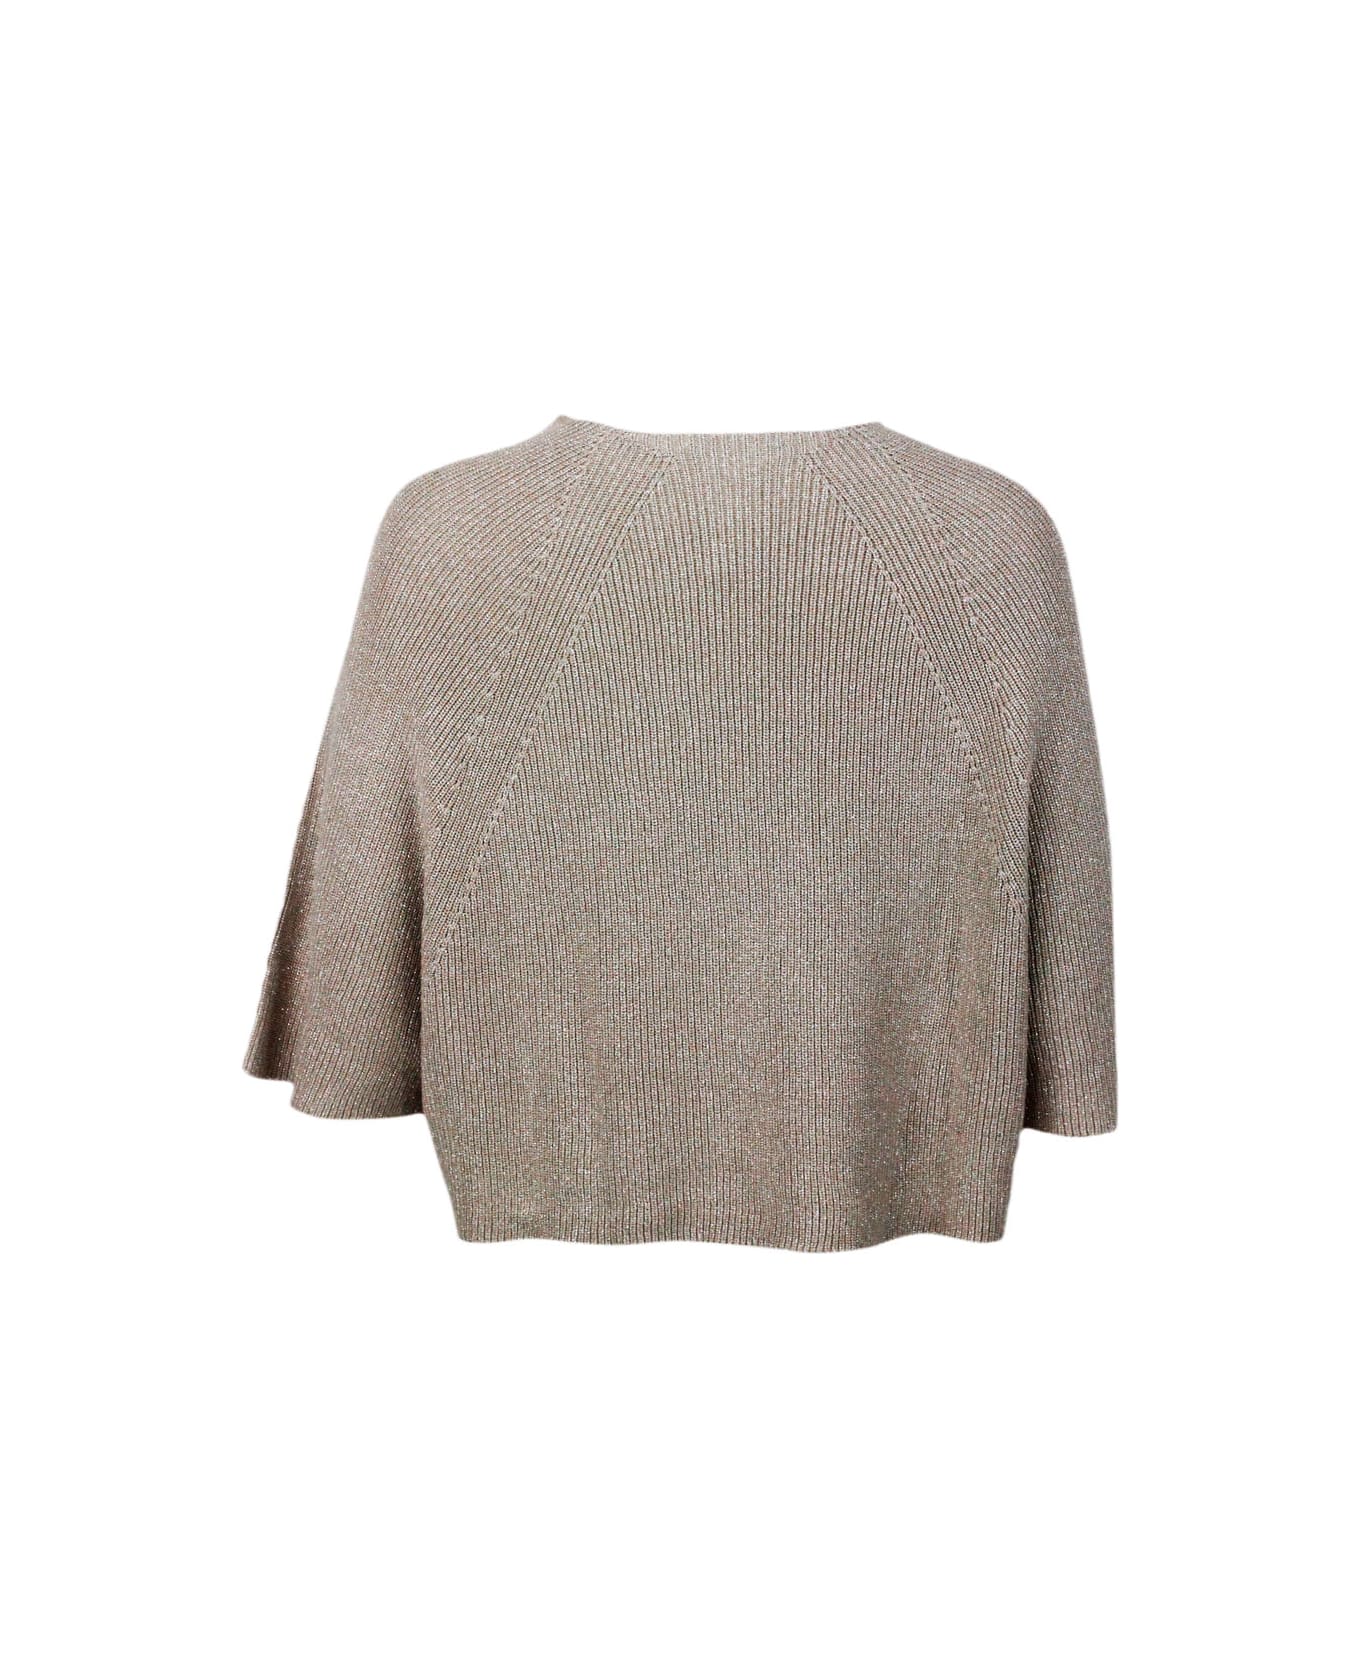 Fabiana Filippi Boat Neck Sweater With Wide Sleeves With Half English Rib Knit In Cotton Embellished With Bright Lurex Threads - Beige ニットウェア